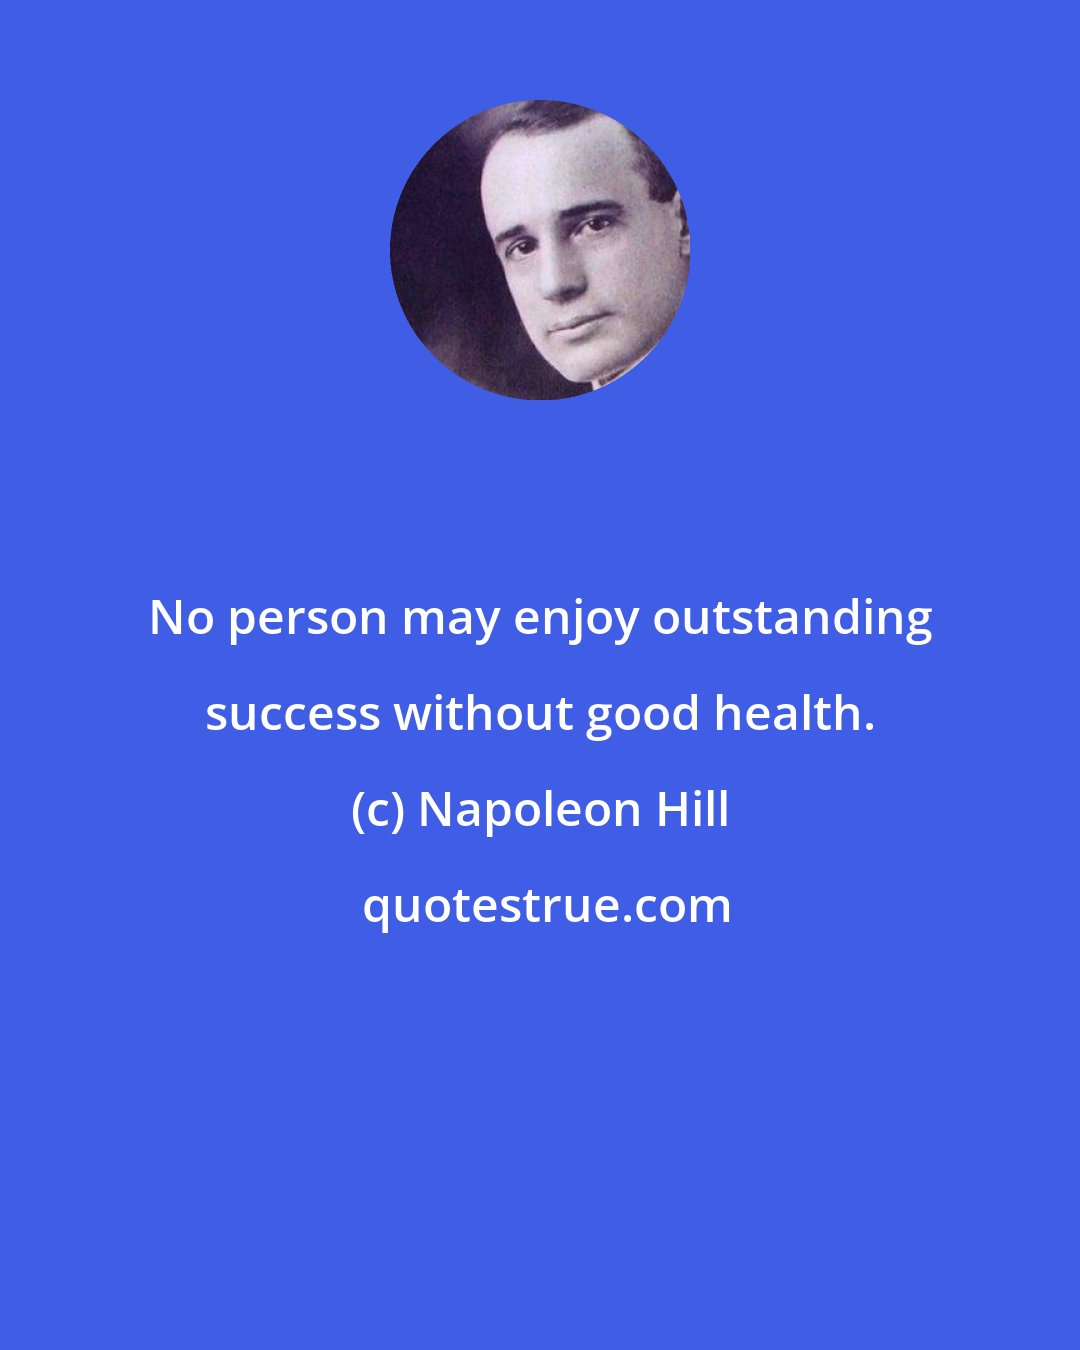 Napoleon Hill: No person may enjoy outstanding success without good health.